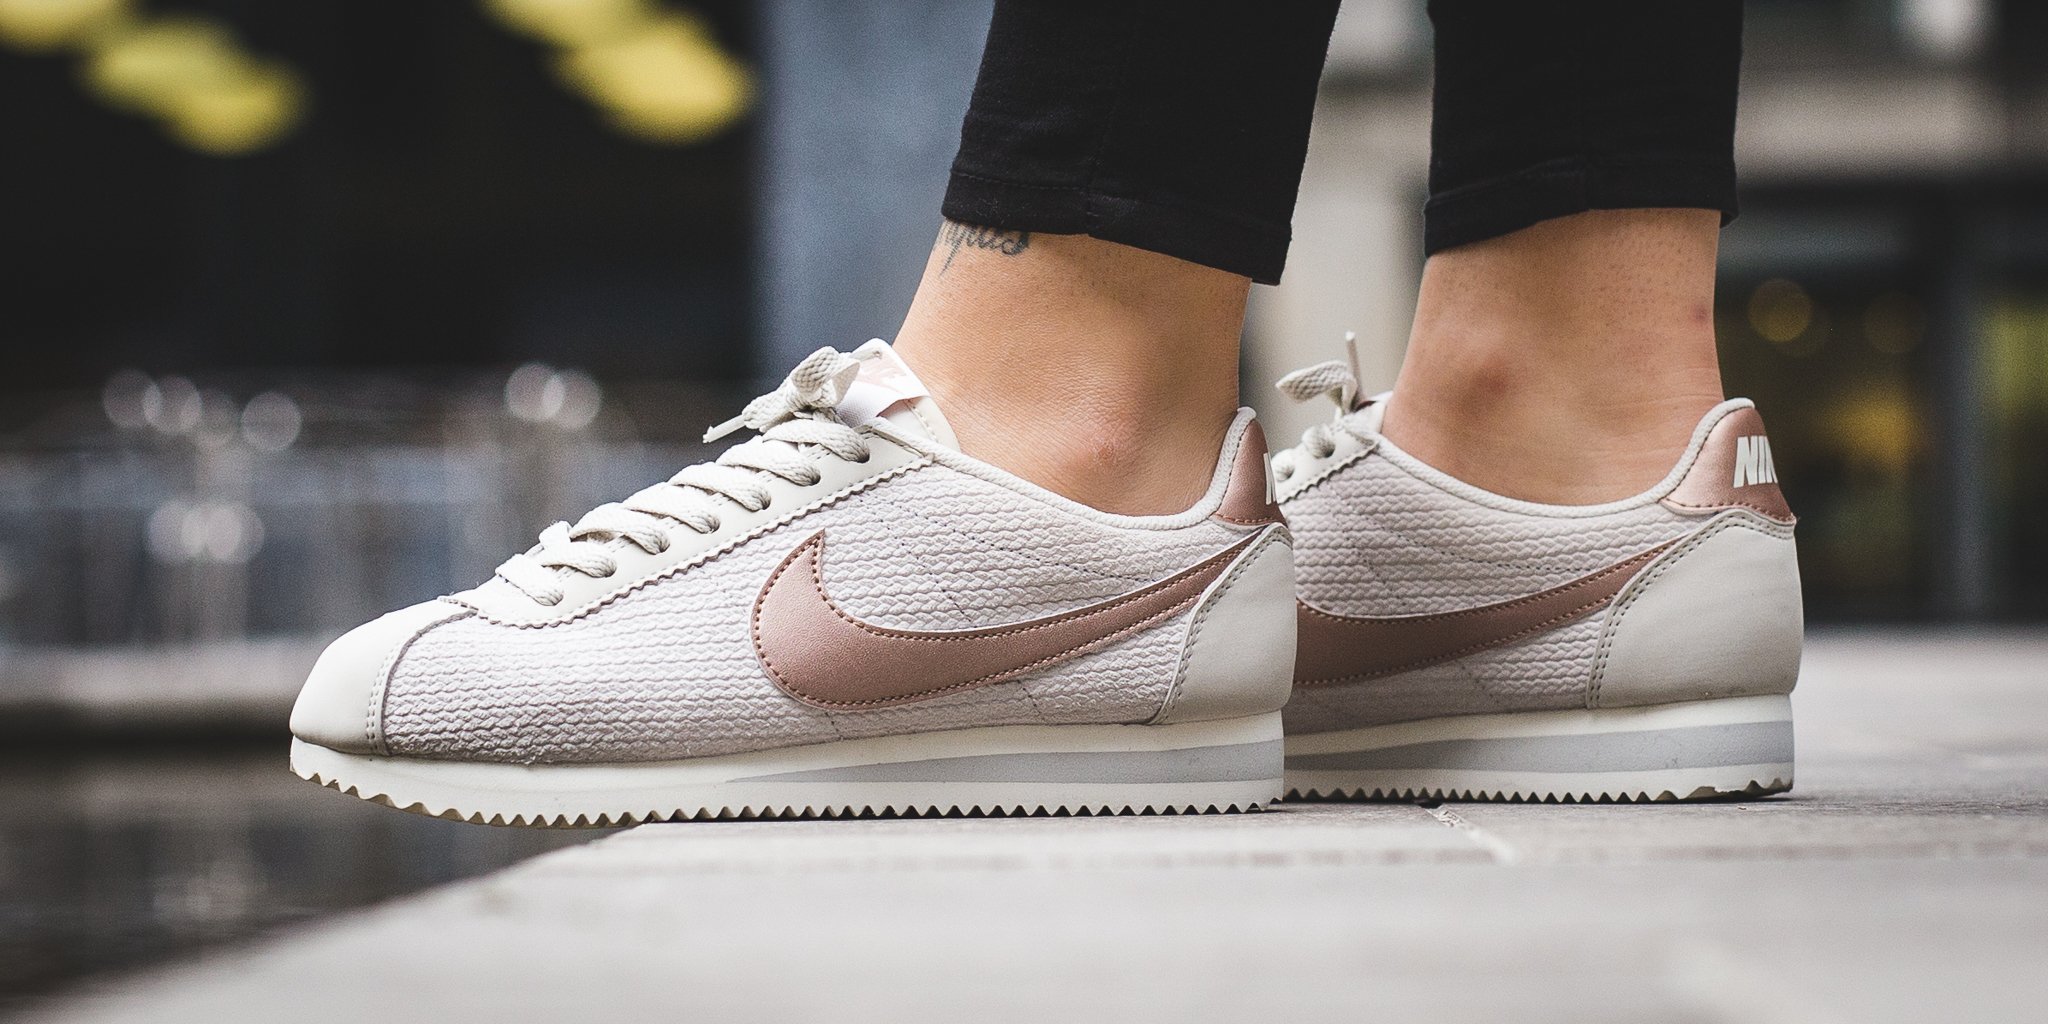 Titolo Twitter: "NEW IN! Nike Wmns Classic Cortez Leather Lux - Light Bone/Metallic Red Bronze-Sail SHOP HERE: https://t.co/A7pvXfkCxK https://t.co/yVQyGADRQY" / Twitter